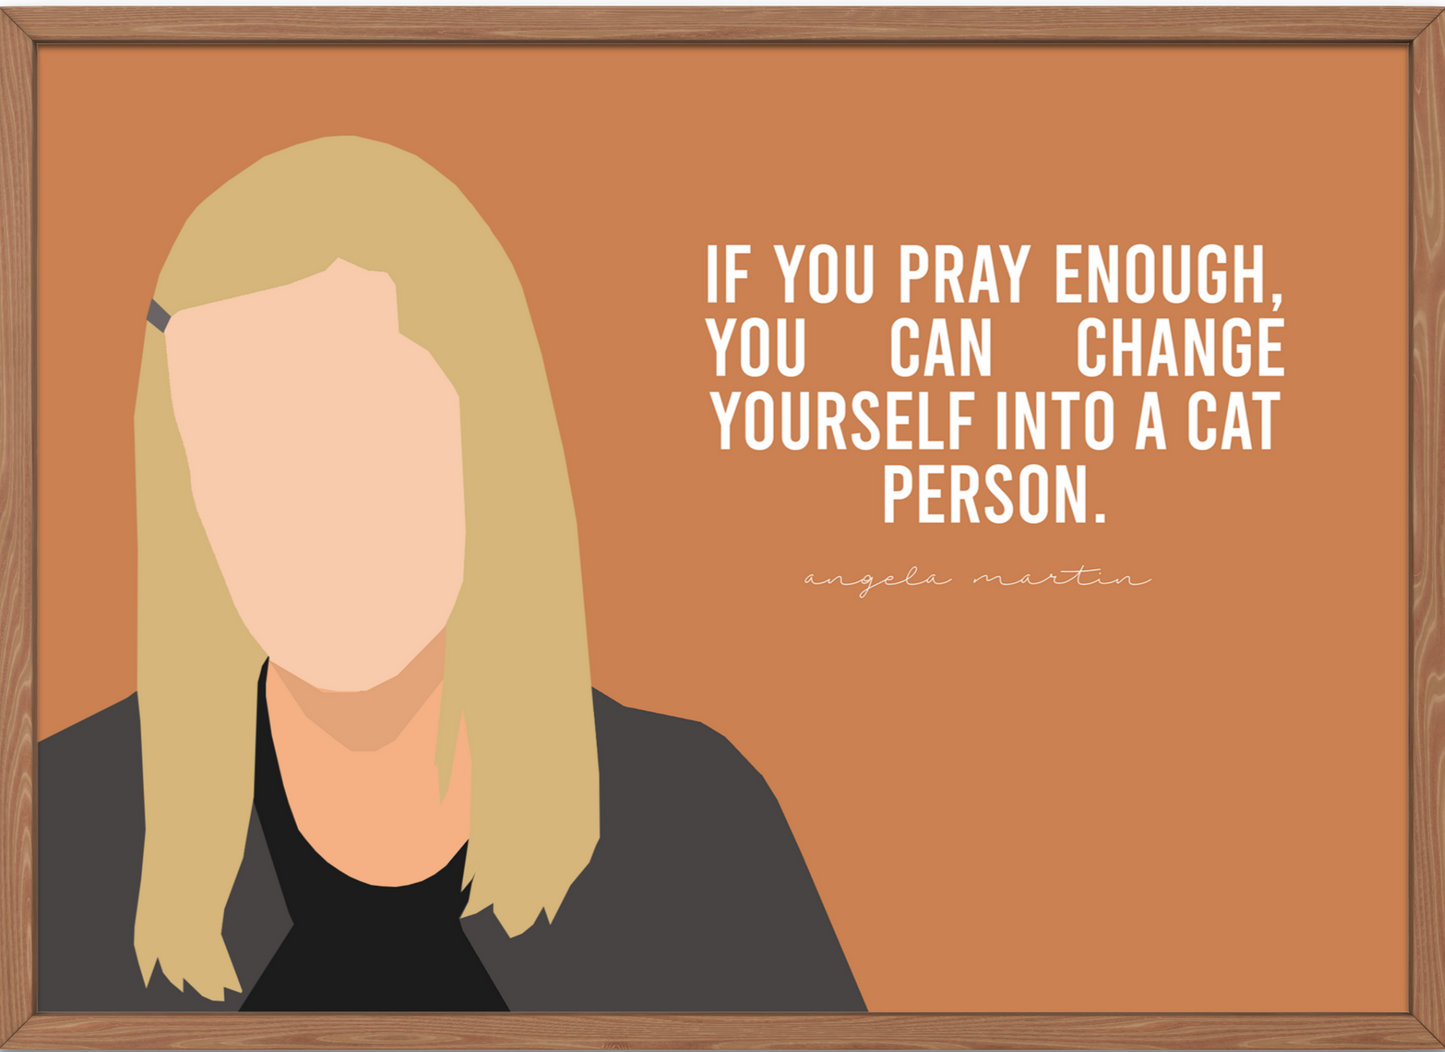 Angela Martin quote from The Office tv show. "If you pray enough, you can change yourself into a cat person